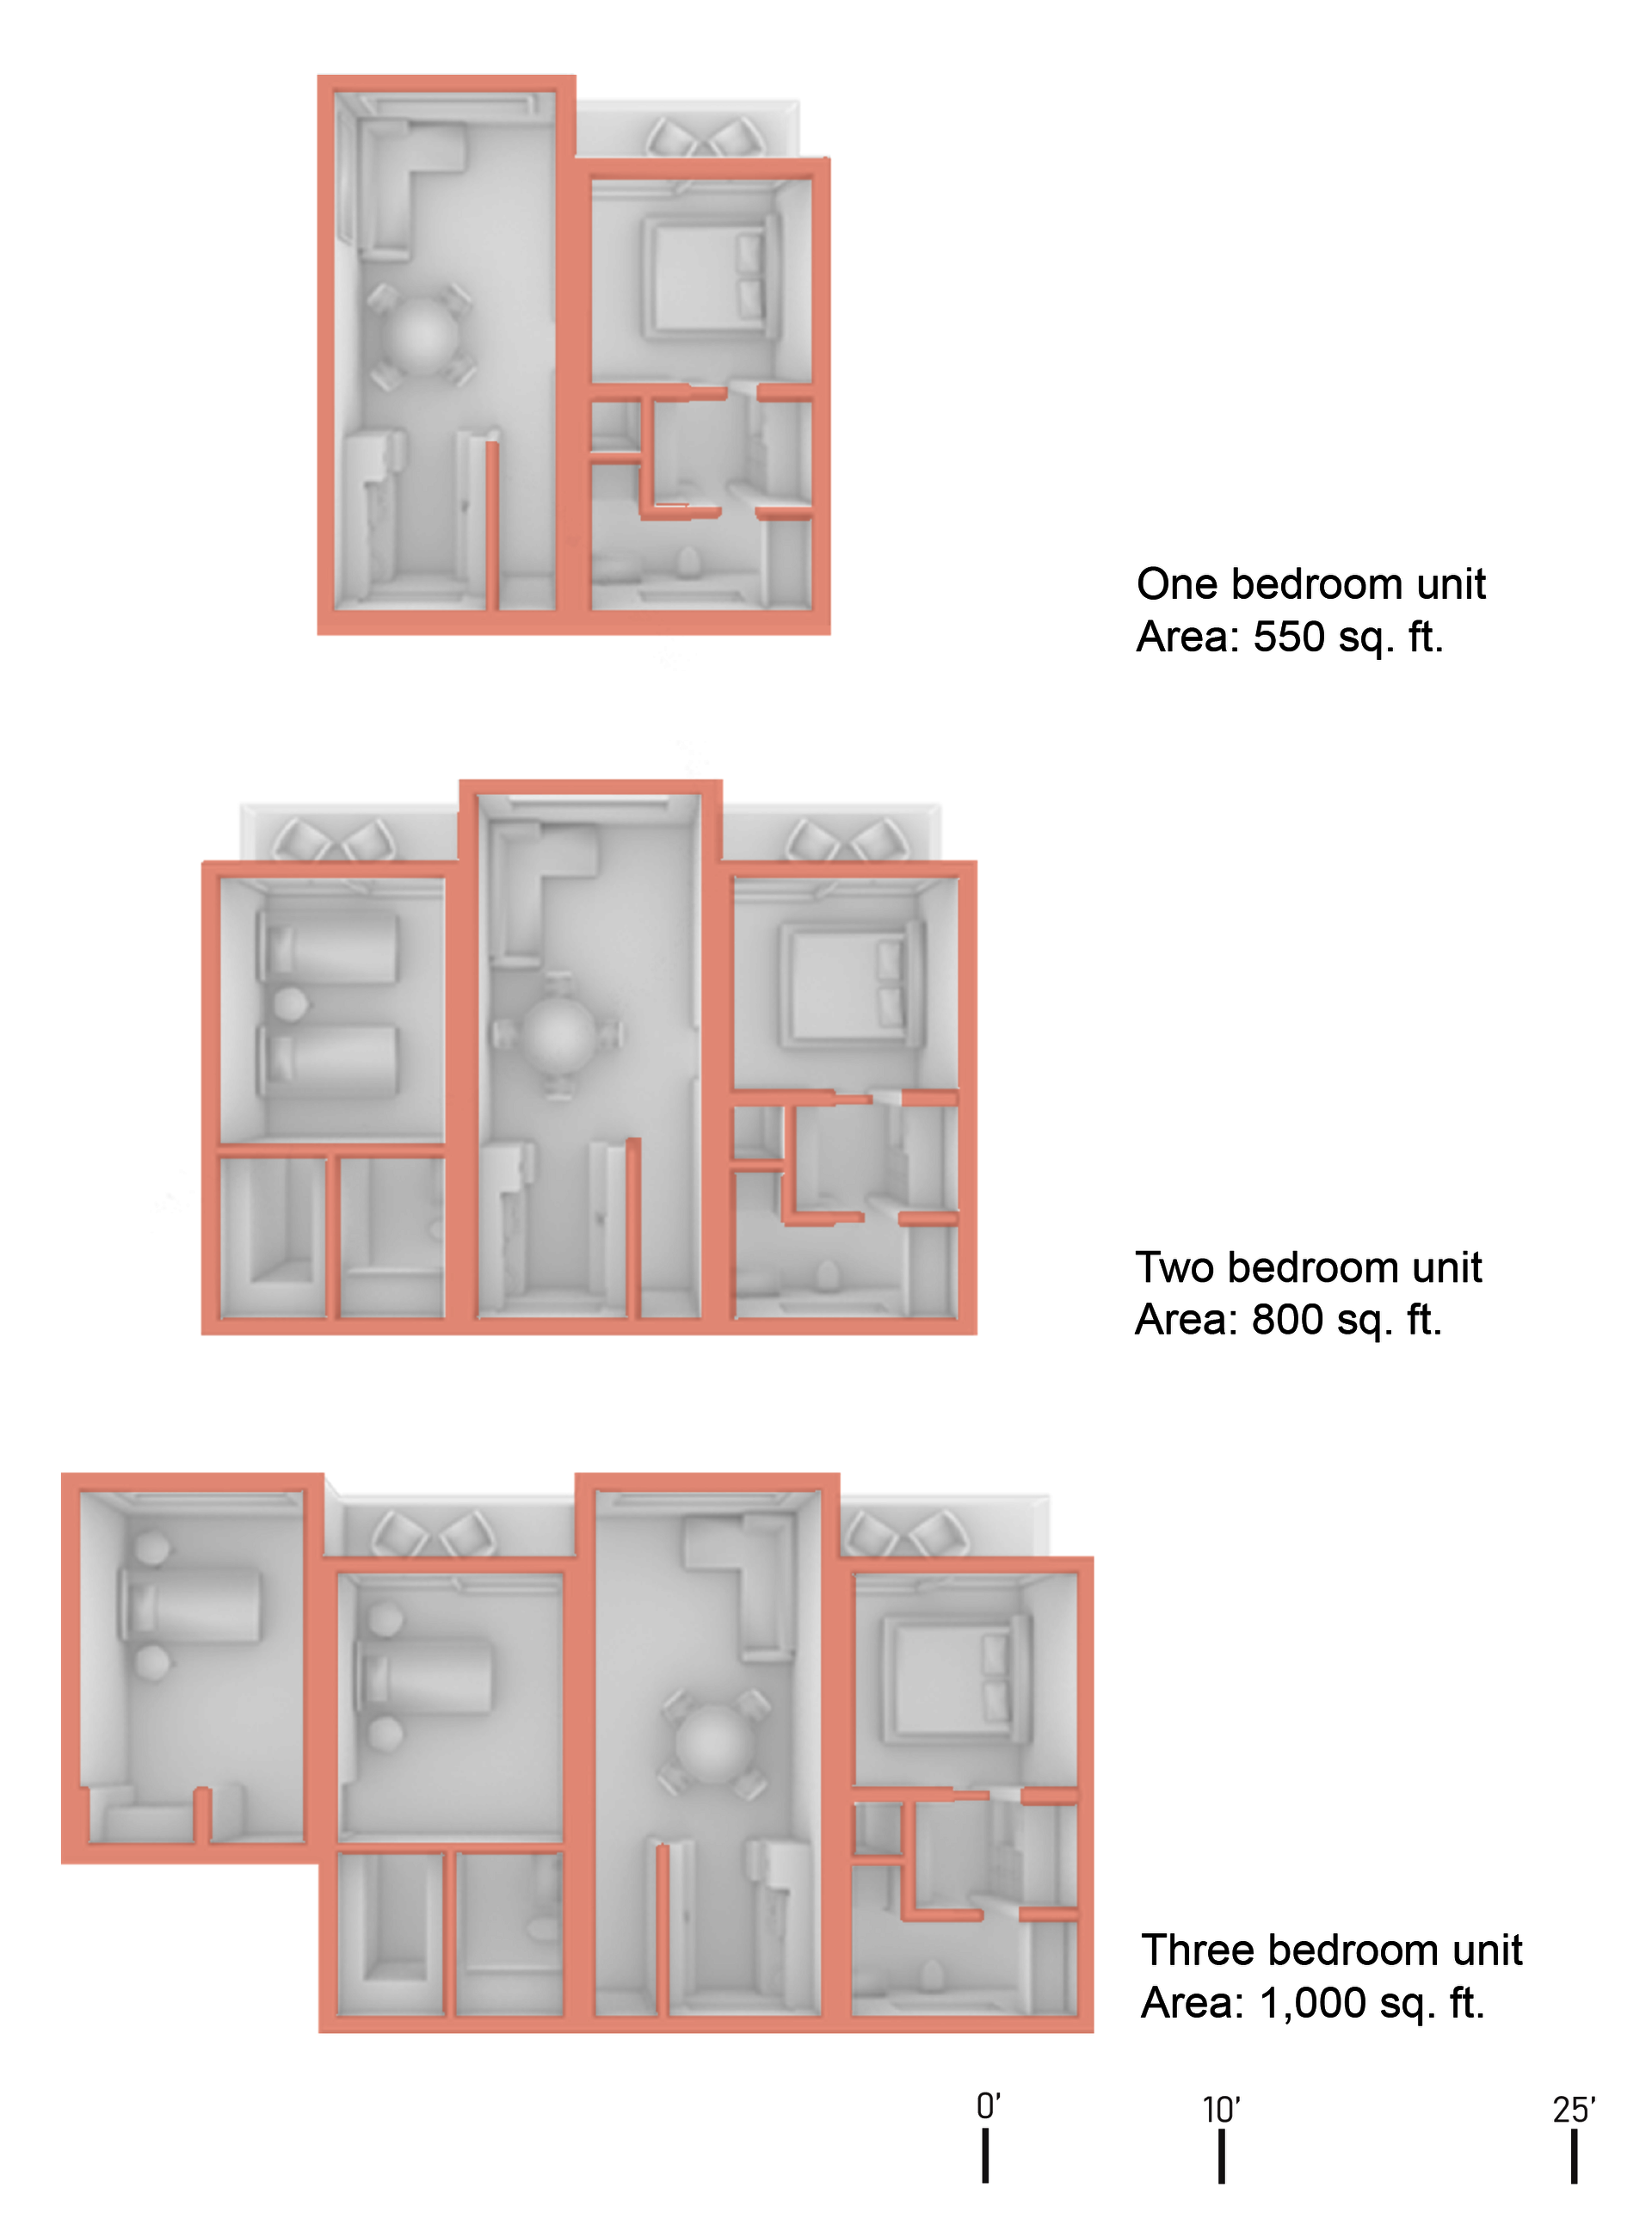 The diagram above highlights the different types of units in the complex ranging from one, two, or three bedrooms. 